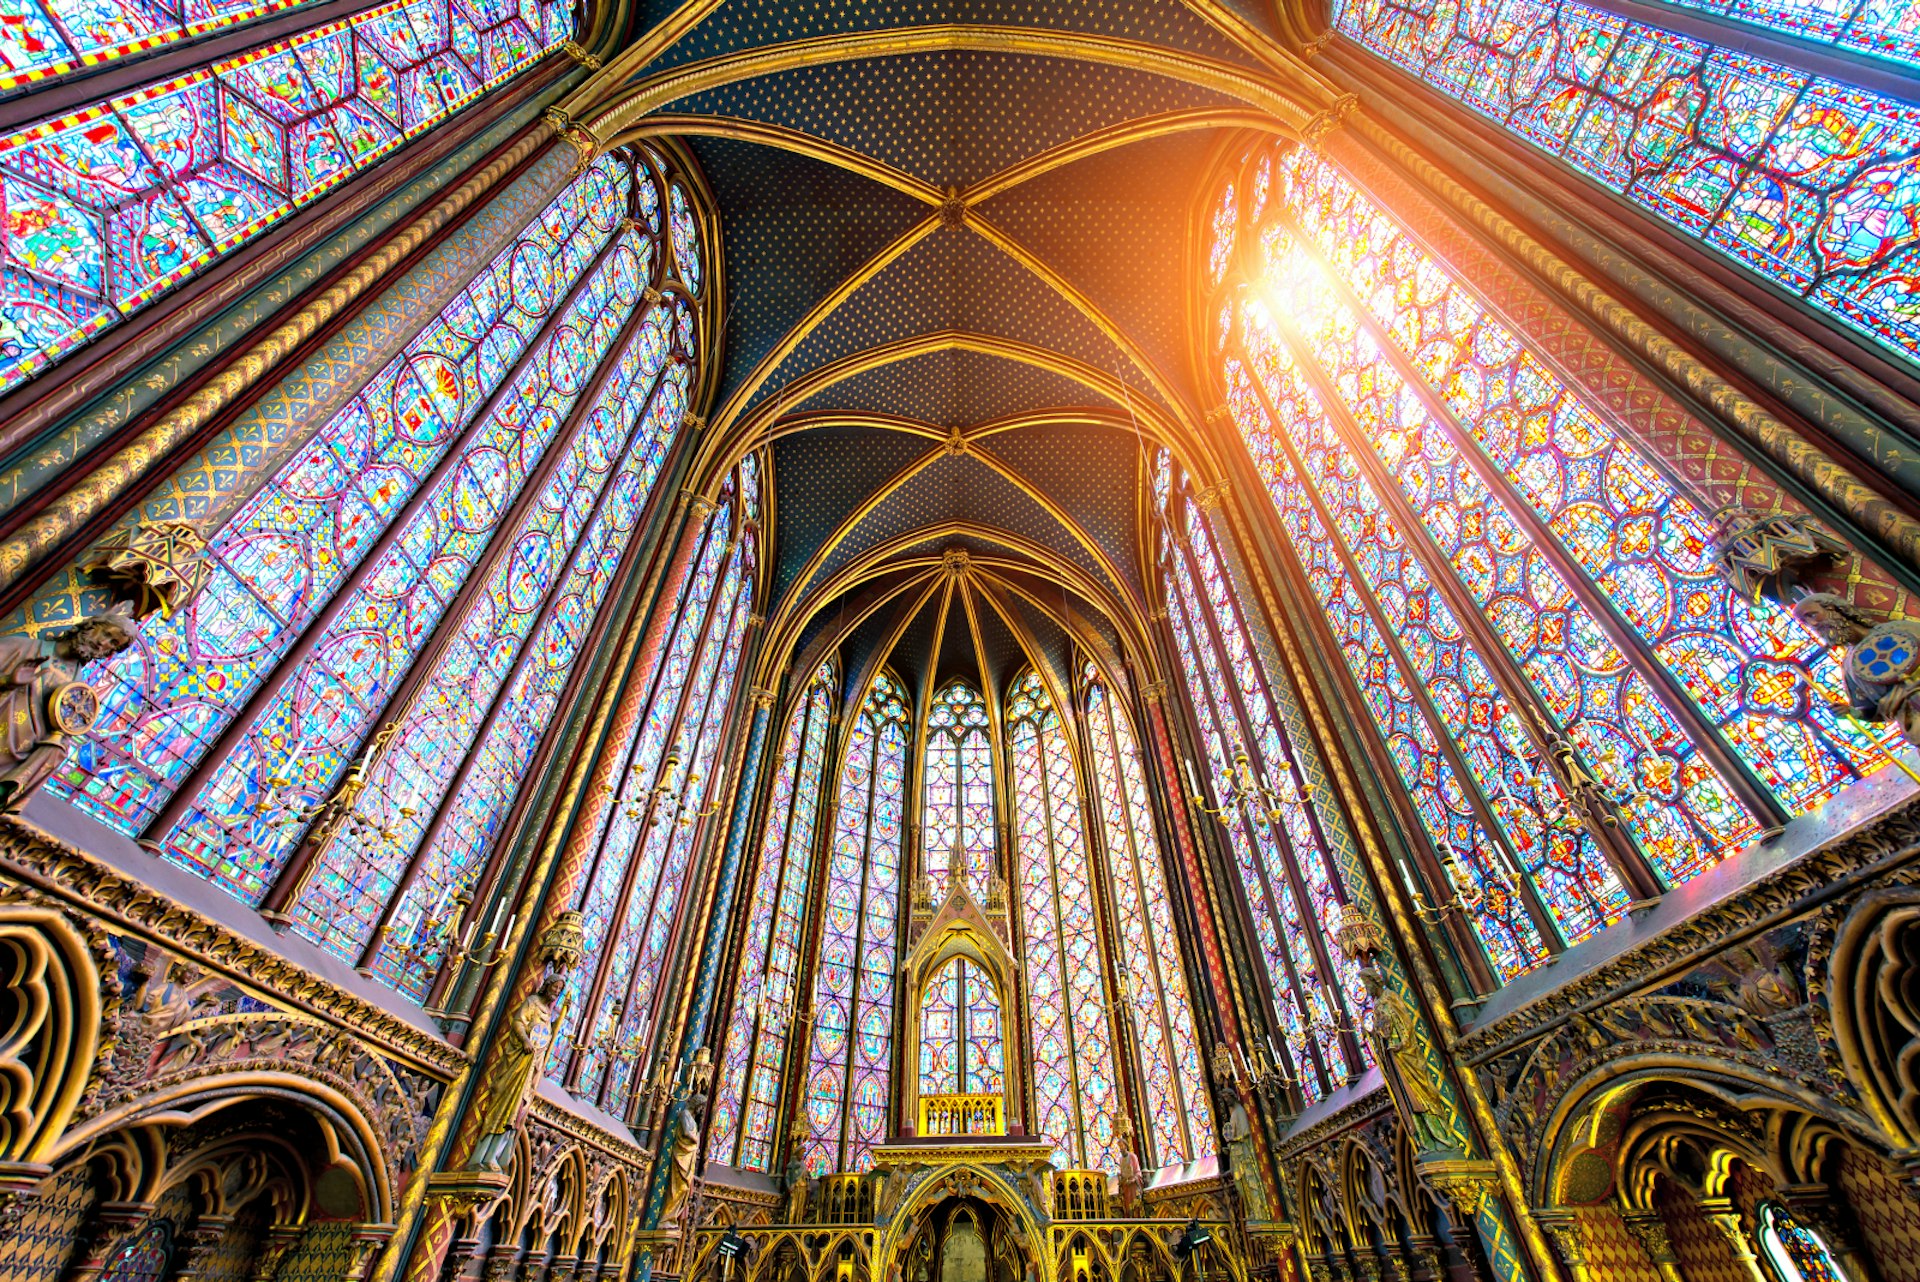 The sun streams through the stained glass windows of Sainte-Chapelle, Paris